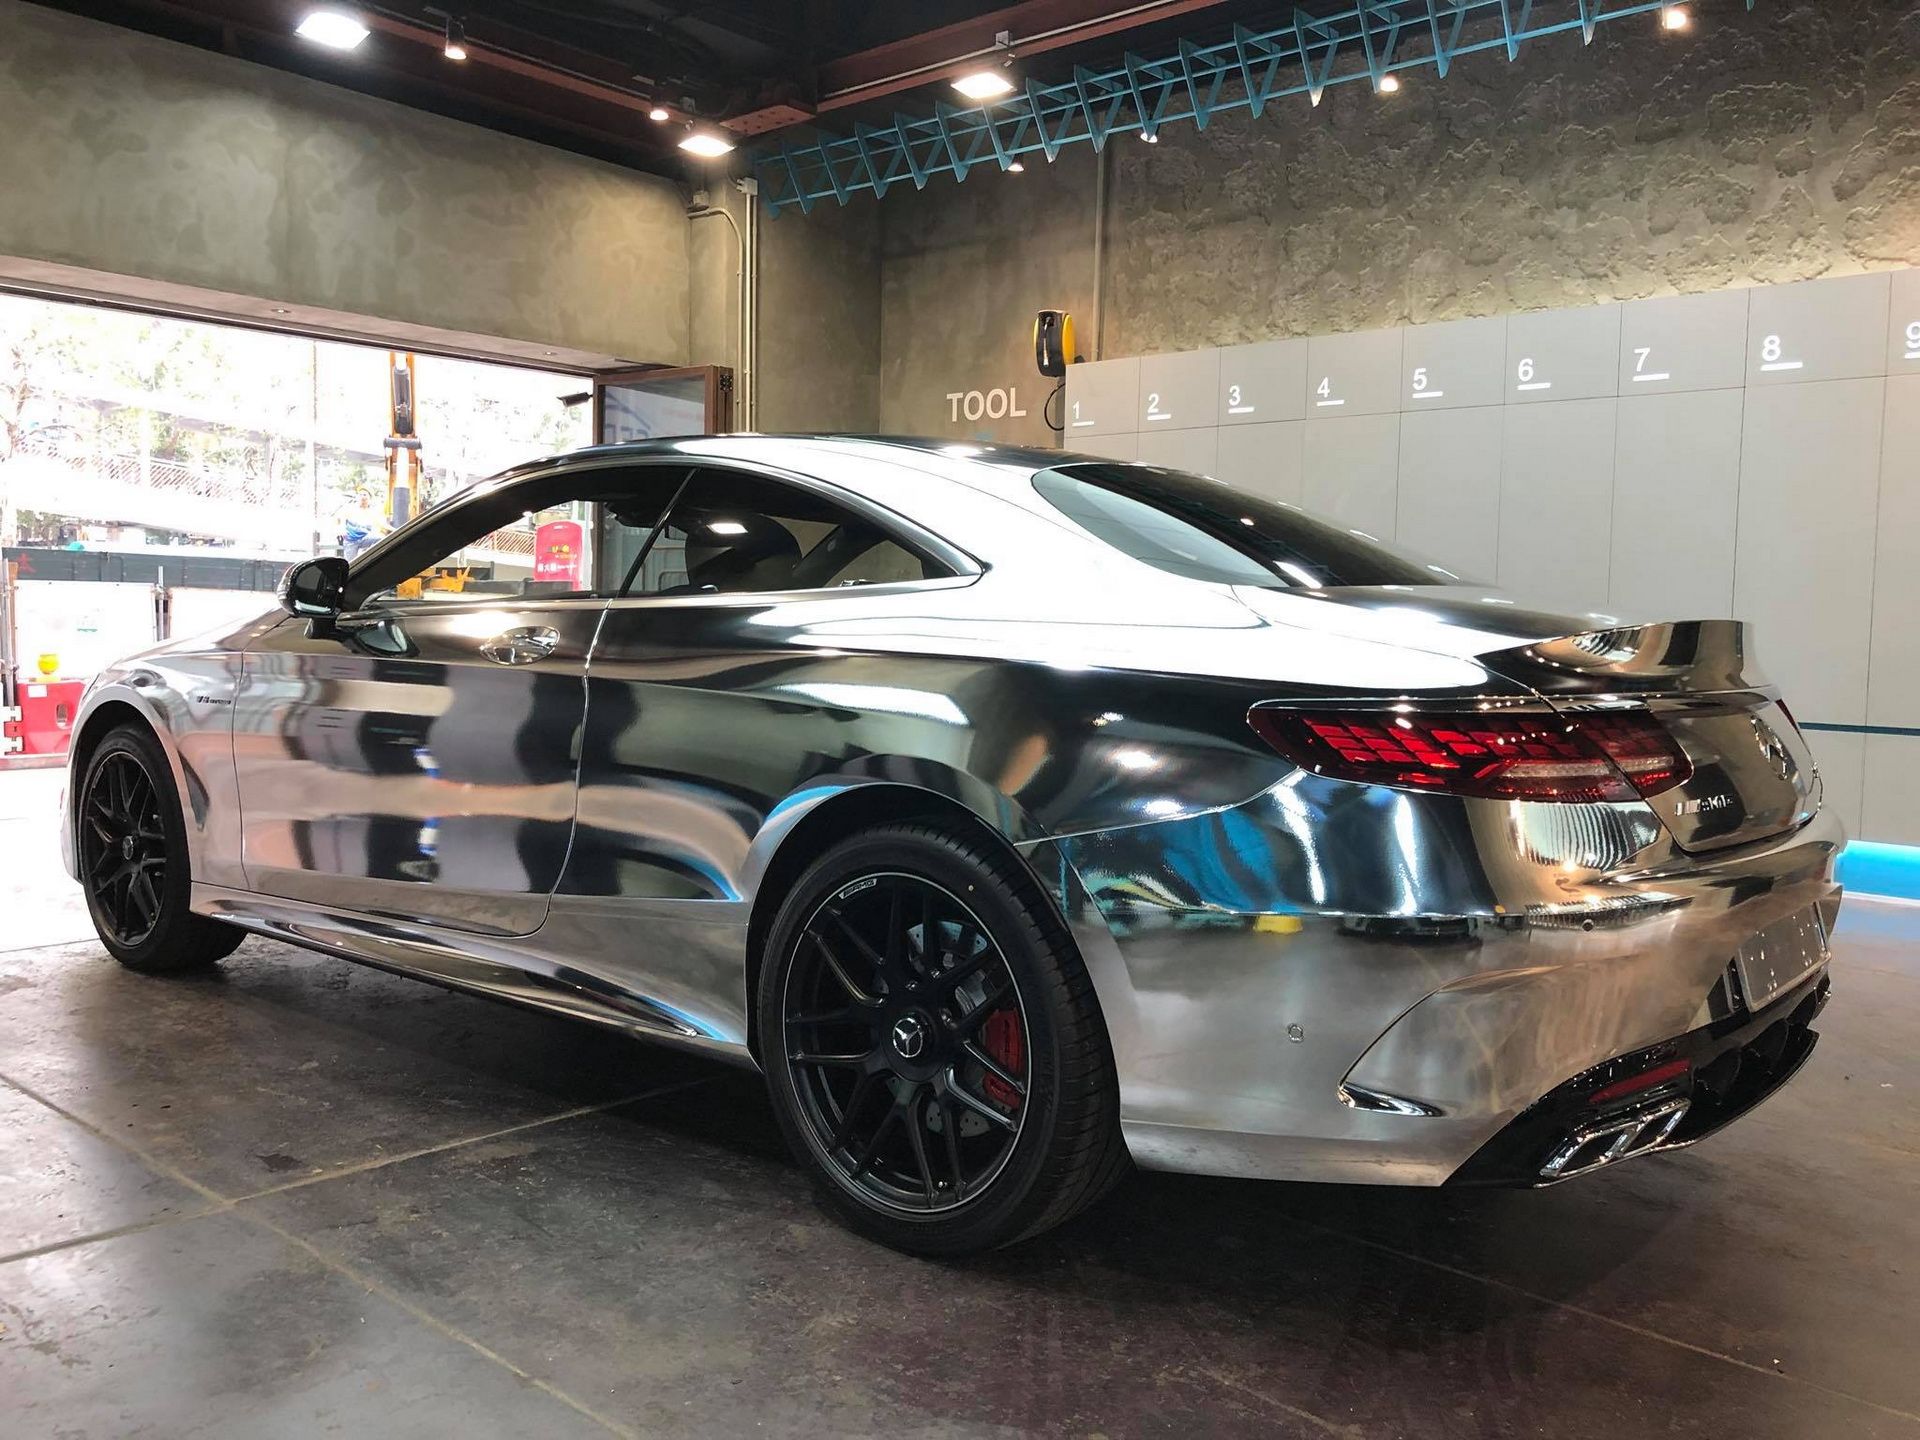 This Mercedes Amg S63 Coupe Was Dipped In Silver Mercedesblog